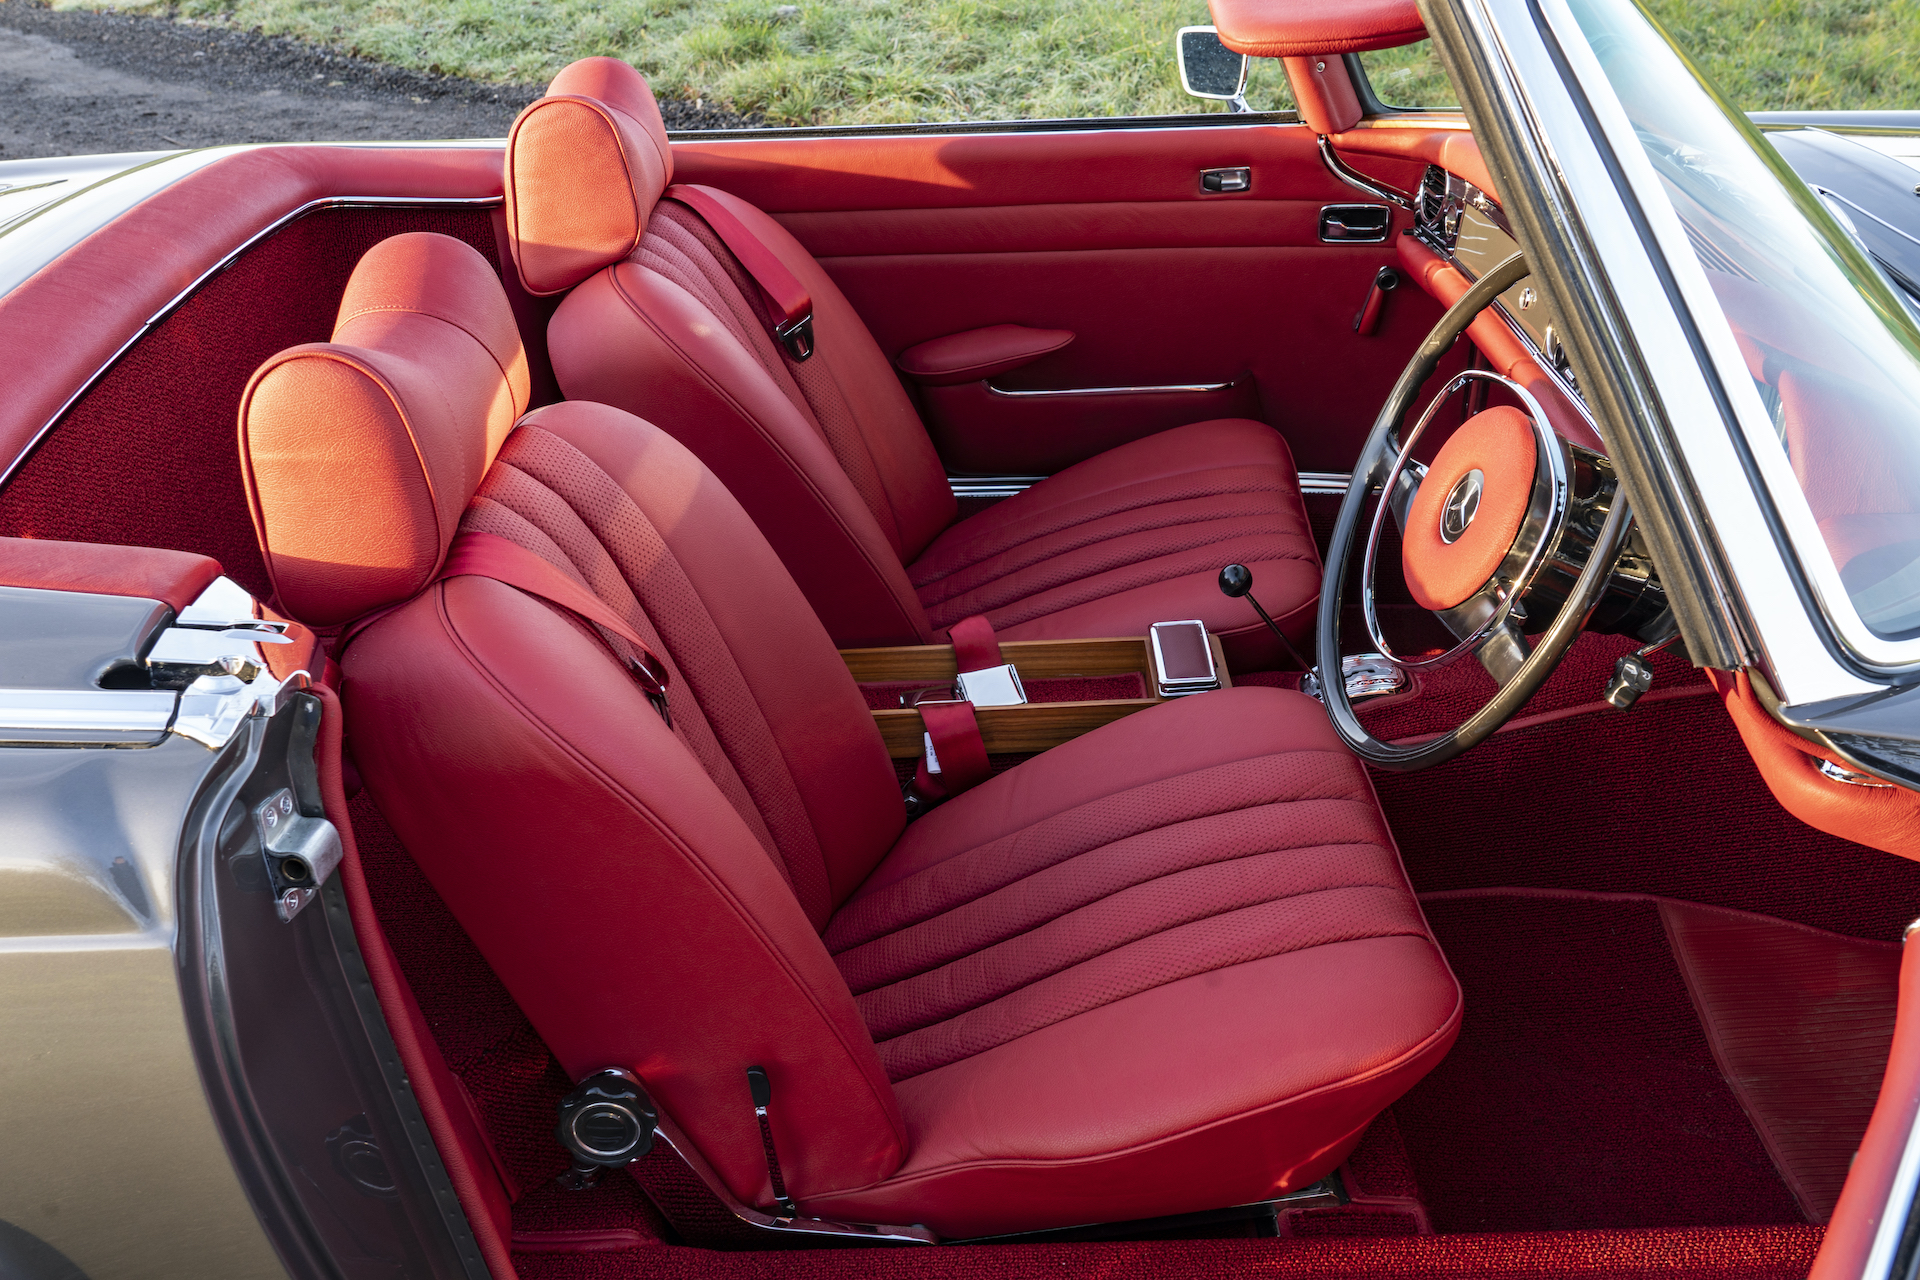 Mercedes Leather Red Seats restored by SLSHOP